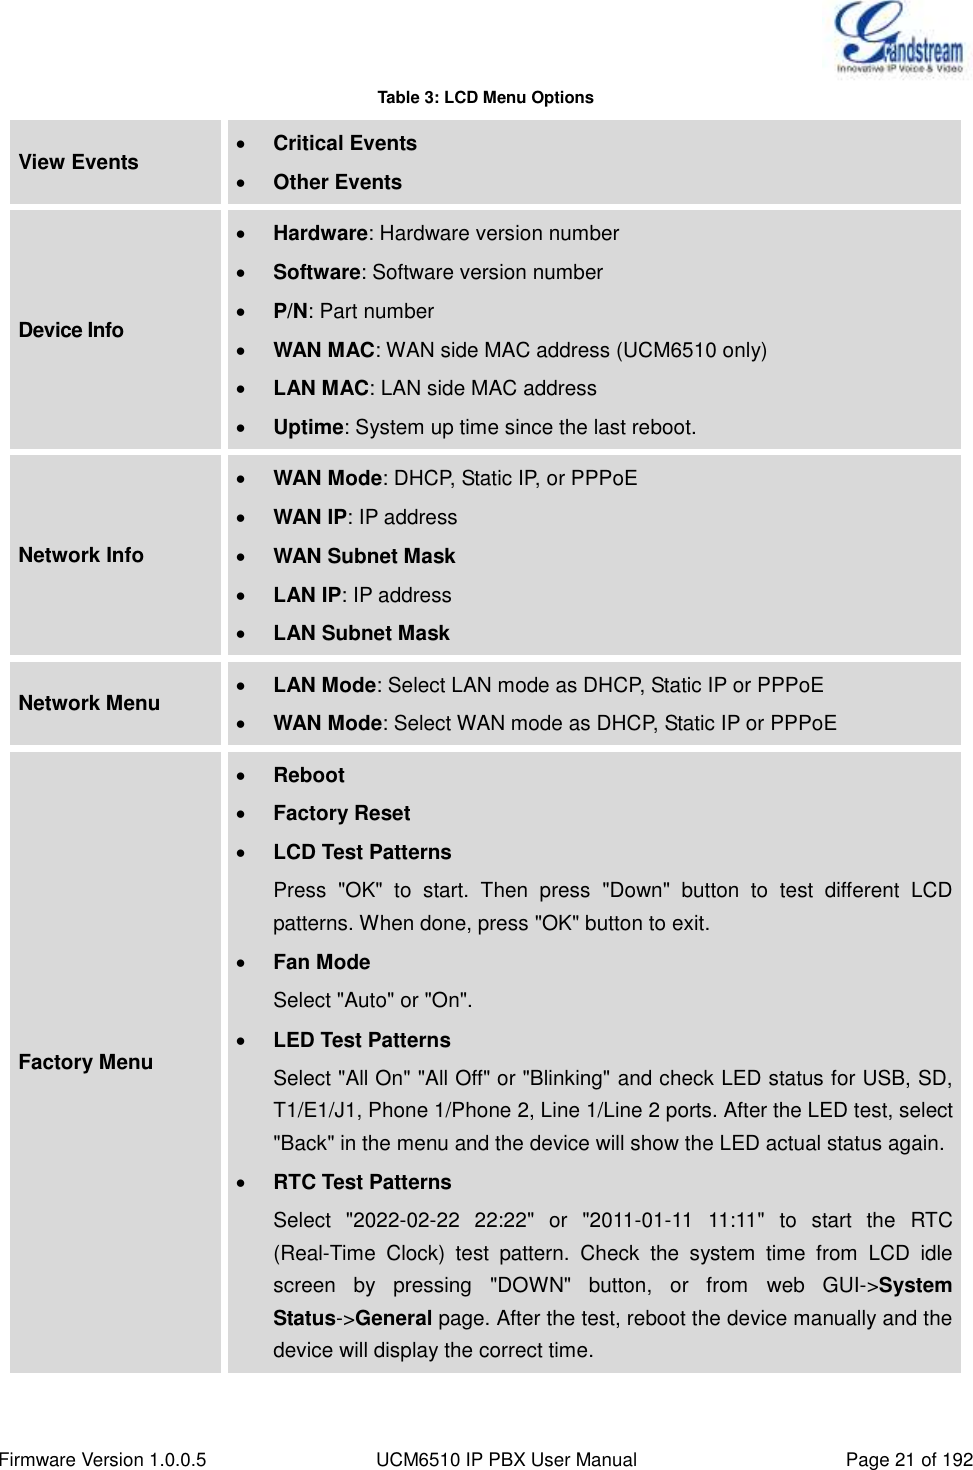  Firmware Version 1.0.0.5 UCM6510 IP PBX User Manual Page 21 of 192  Table 3: LCD Menu Options View Events  Critical Events  Other Events Device Info  Hardware: Hardware version number  Software: Software version number  P/N: Part number  WAN MAC: WAN side MAC address (UCM6510 only)  LAN MAC: LAN side MAC address  Uptime: System up time since the last reboot. Network Info  WAN Mode: DHCP, Static IP, or PPPoE  WAN IP: IP address  WAN Subnet Mask  LAN IP: IP address  LAN Subnet Mask Network Menu  LAN Mode: Select LAN mode as DHCP, Static IP or PPPoE  WAN Mode: Select WAN mode as DHCP, Static IP or PPPoE Factory Menu  Reboot  Factory Reset  LCD Test Patterns Press  &quot;OK&quot;  to  start.  Then  press  &quot;Down&quot;  button  to  test  different  LCD patterns. When done, press &quot;OK&quot; button to exit.  Fan Mode Select &quot;Auto&quot; or &quot;On&quot;.  LED Test Patterns Select &quot;All On&quot; &quot;All Off&quot; or &quot;Blinking&quot; and check LED status for USB, SD, T1/E1/J1, Phone 1/Phone 2, Line 1/Line 2 ports. After the LED test, select &quot;Back&quot; in the menu and the device will show the LED actual status again.  RTC Test Patterns Select  &quot;2022-02-22  22:22&quot;  or  &quot;2011-01-11  11:11&quot;  to  start  the  RTC (Real-Time  Clock)  test  pattern.  Check  the  system  time  from  LCD  idle screen  by  pressing  &quot;DOWN&quot;  button,  or  from  web  GUI-&gt;System Status-&gt;General page. After the test, reboot the device manually and the device will display the correct time. 